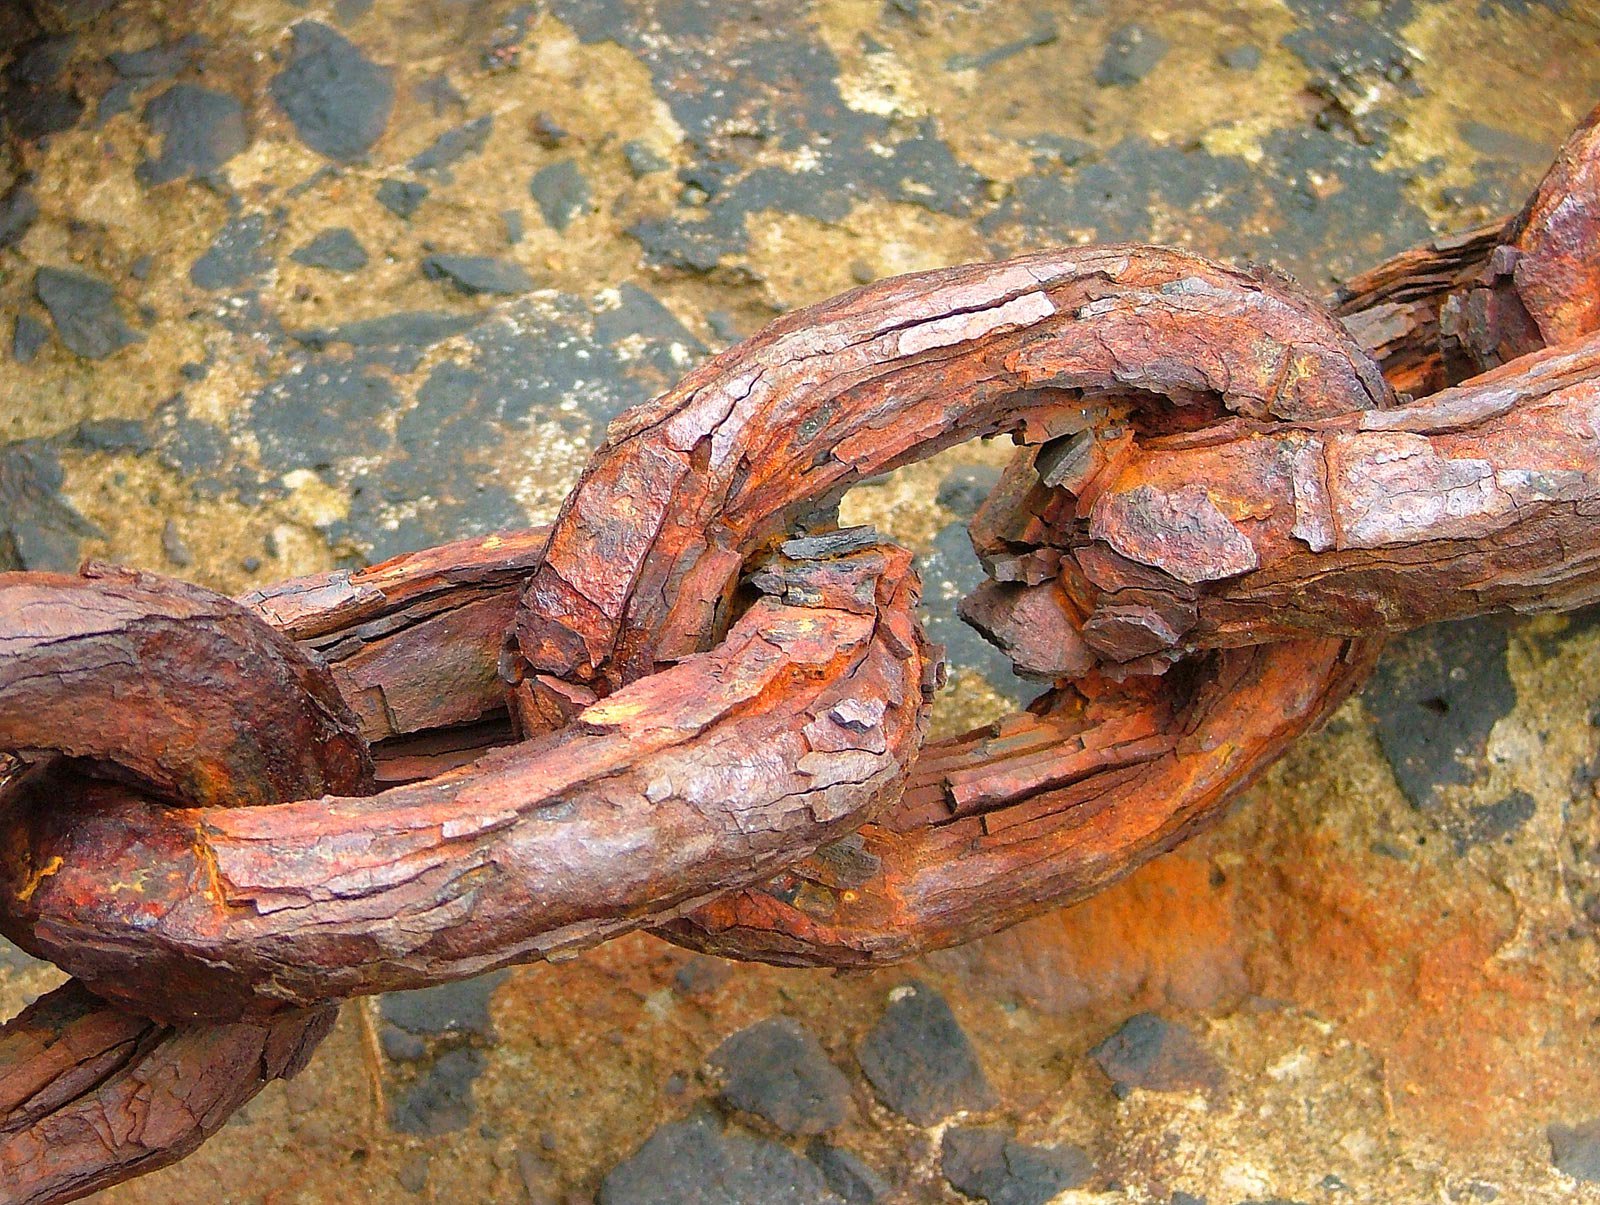 Rusted Chain by Merlin252 on DeviantArt